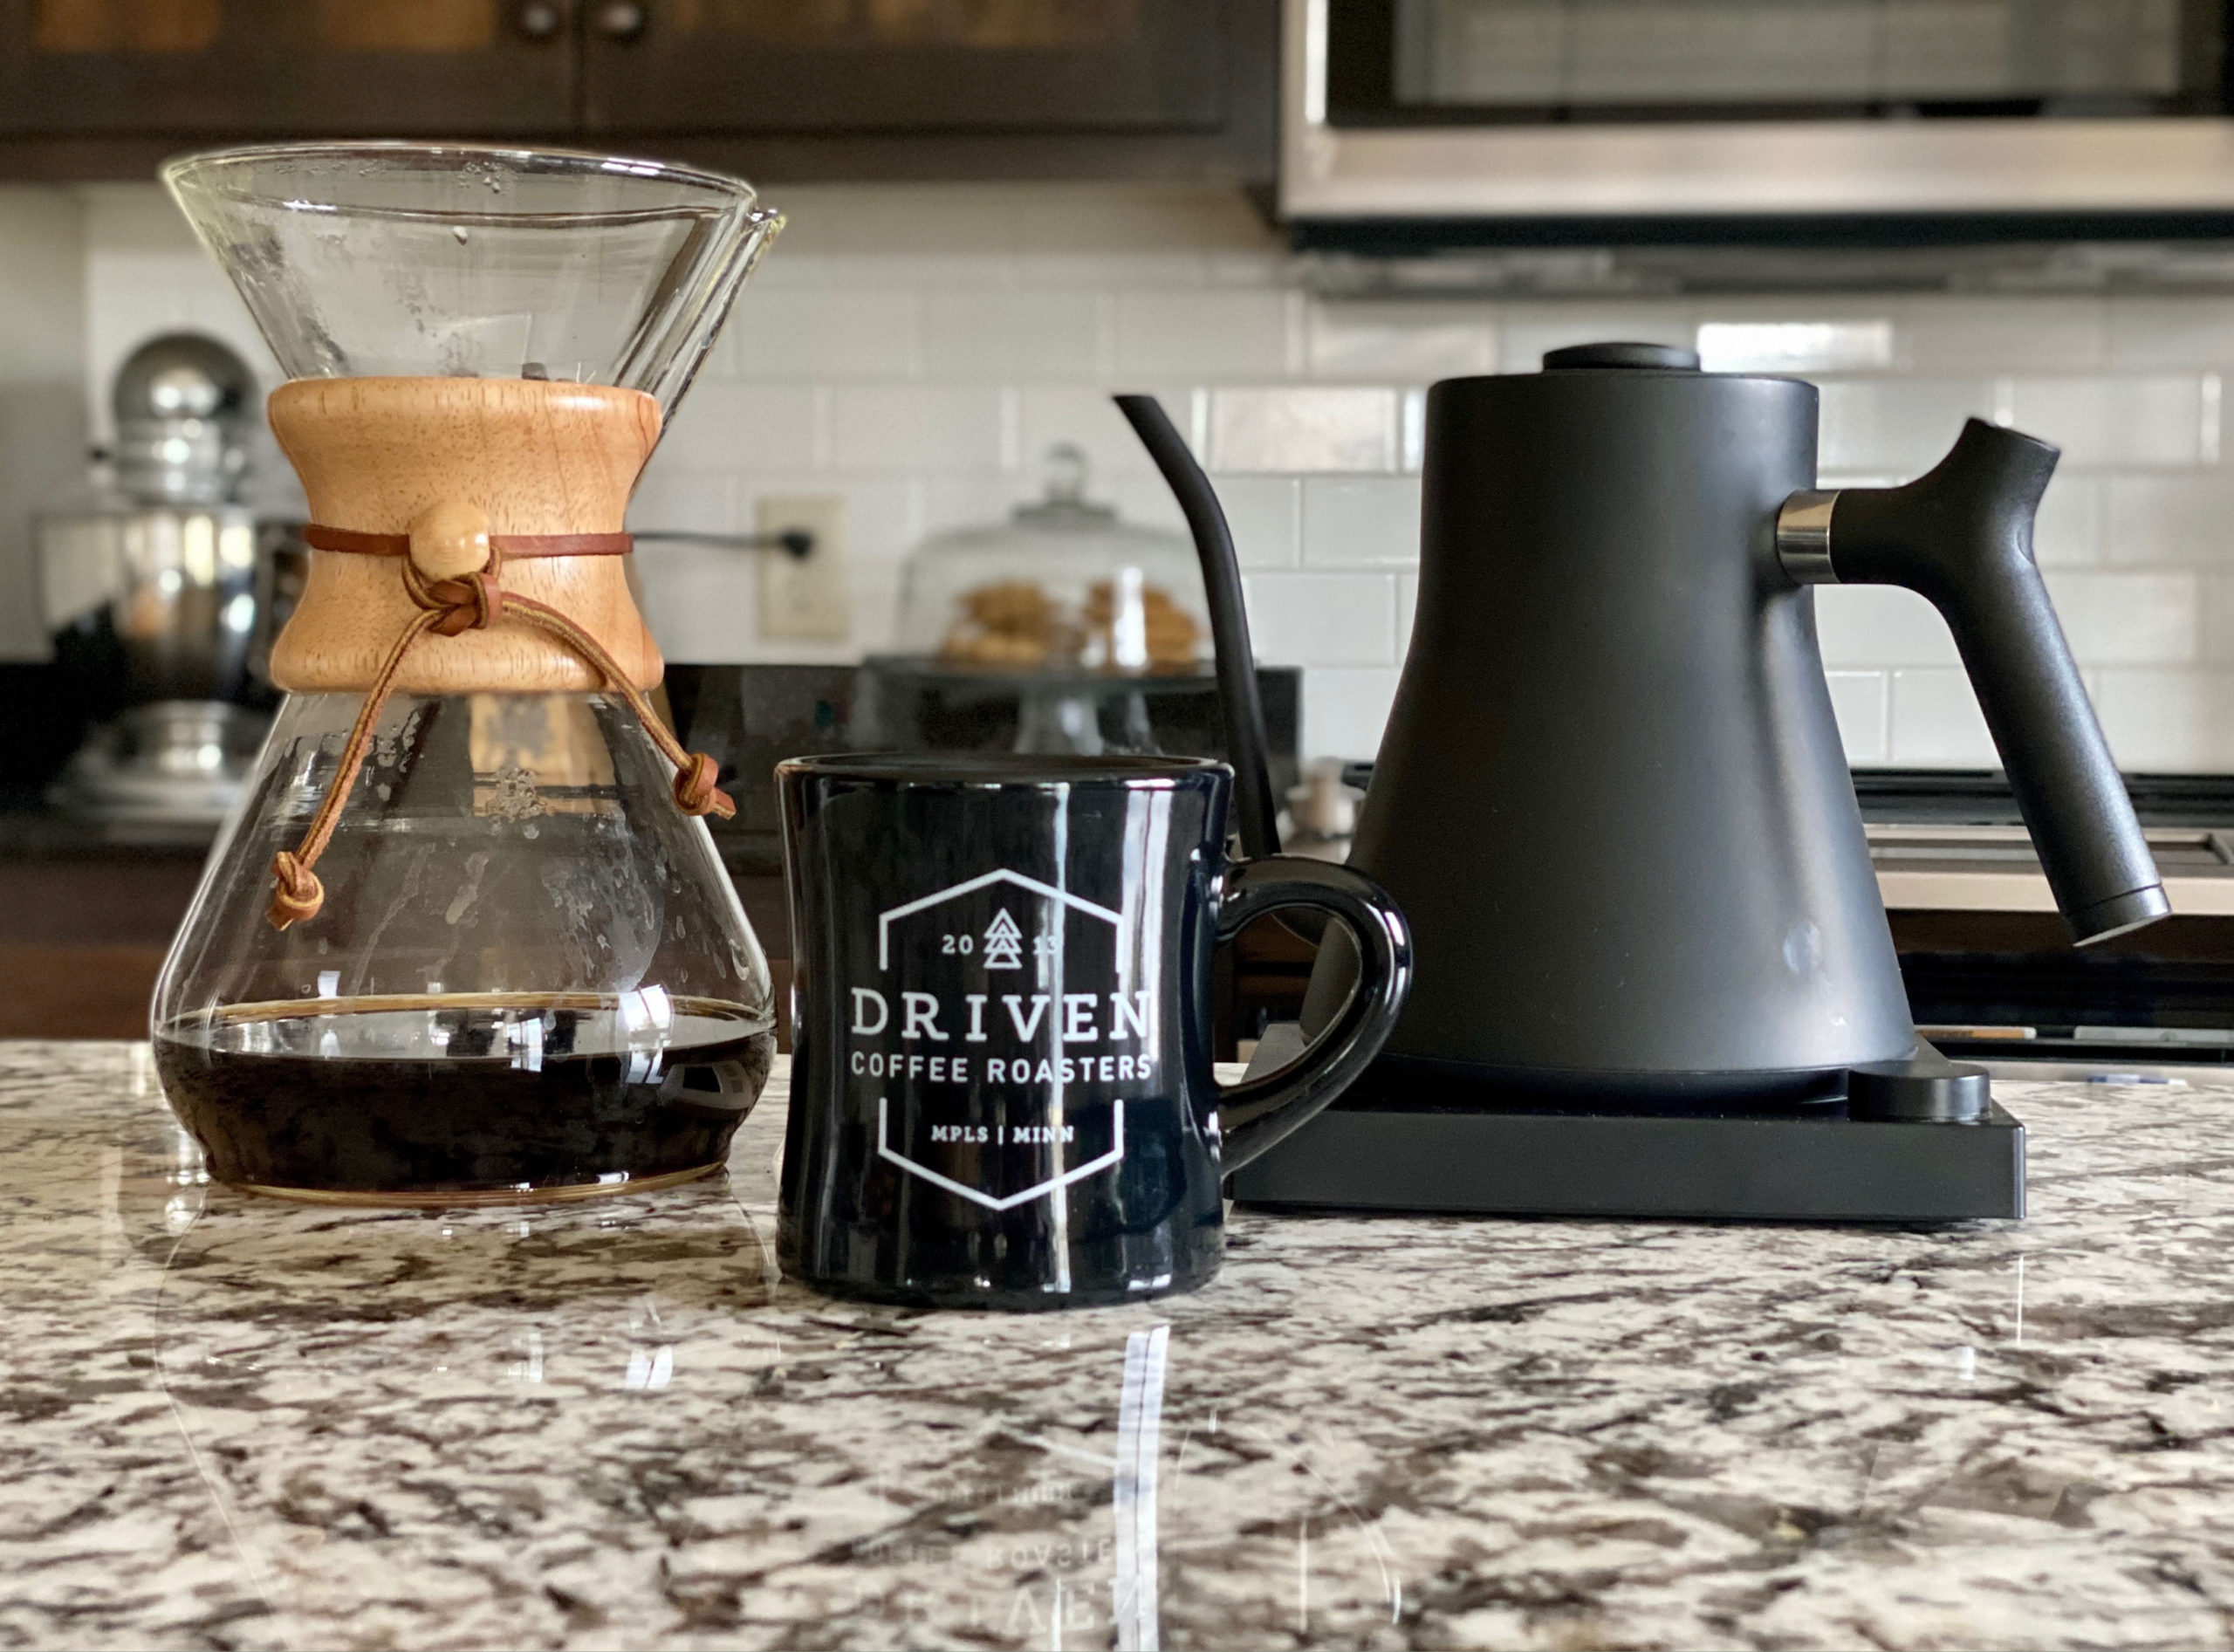 Driven Coffee Product Image